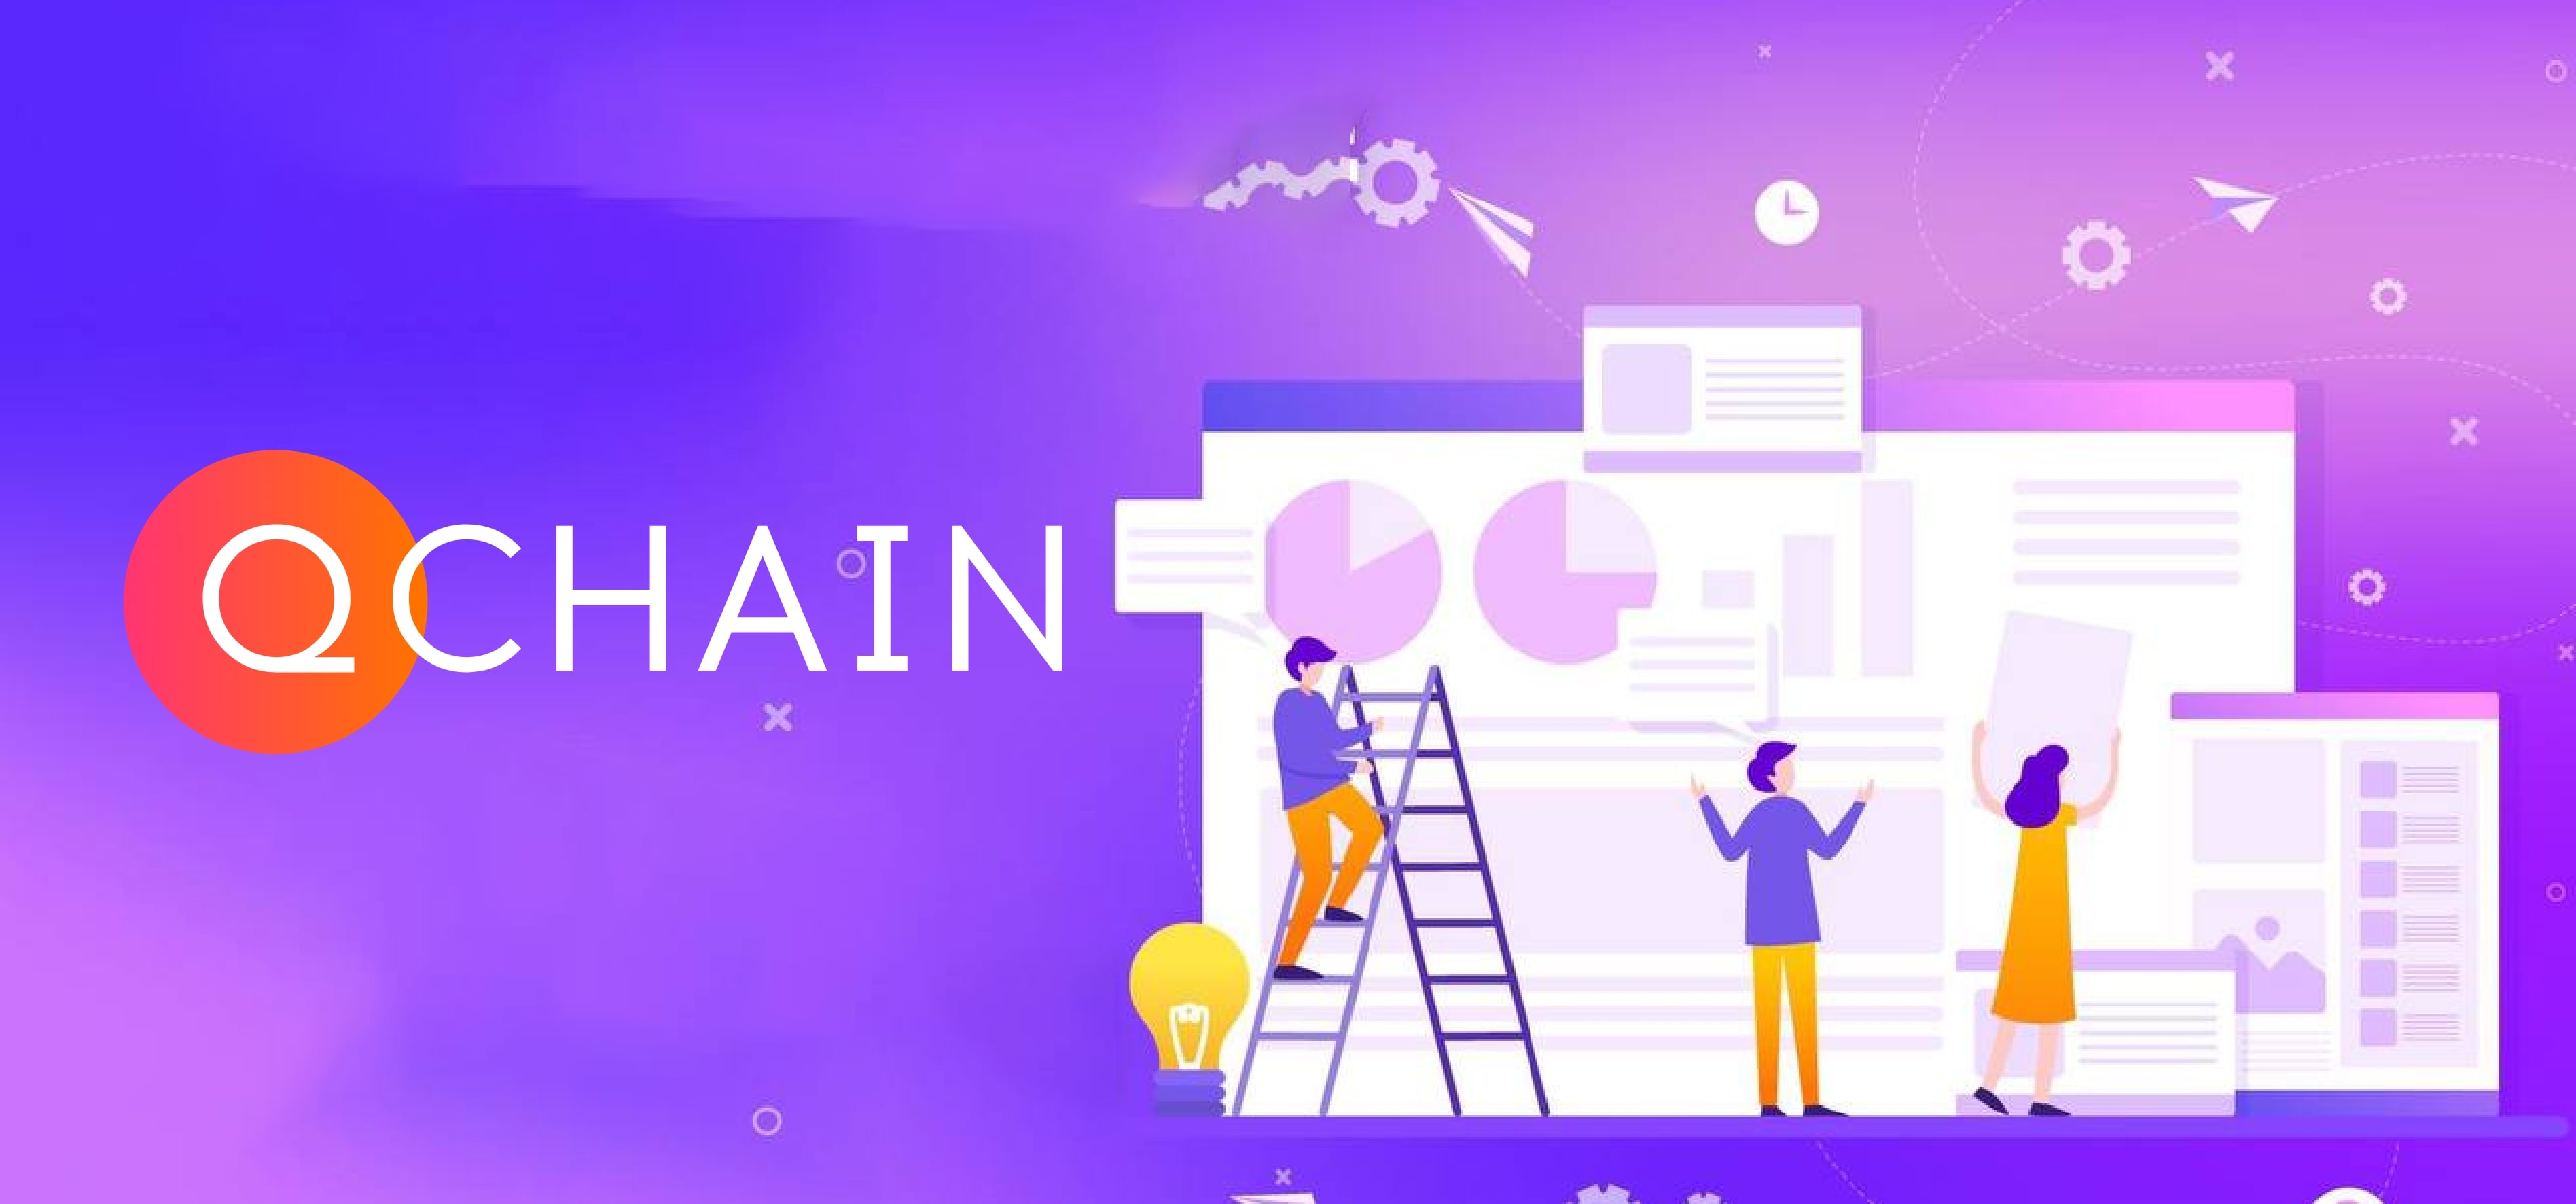 Qchain in the headlines